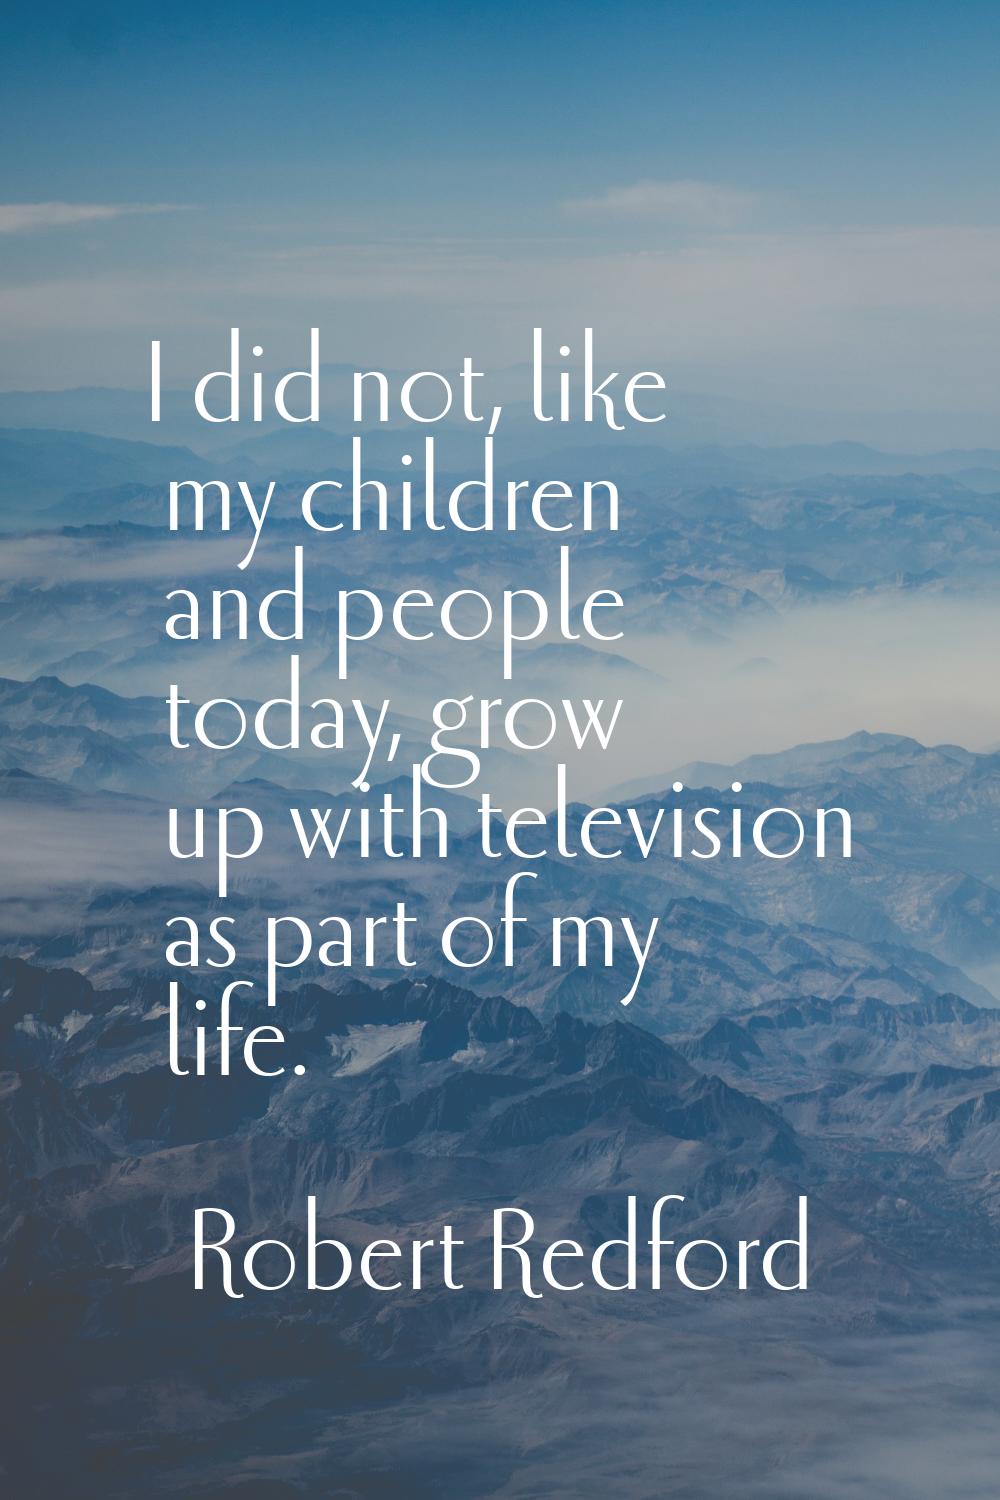 I did not, like my children and people today, grow up with television as part of my life.